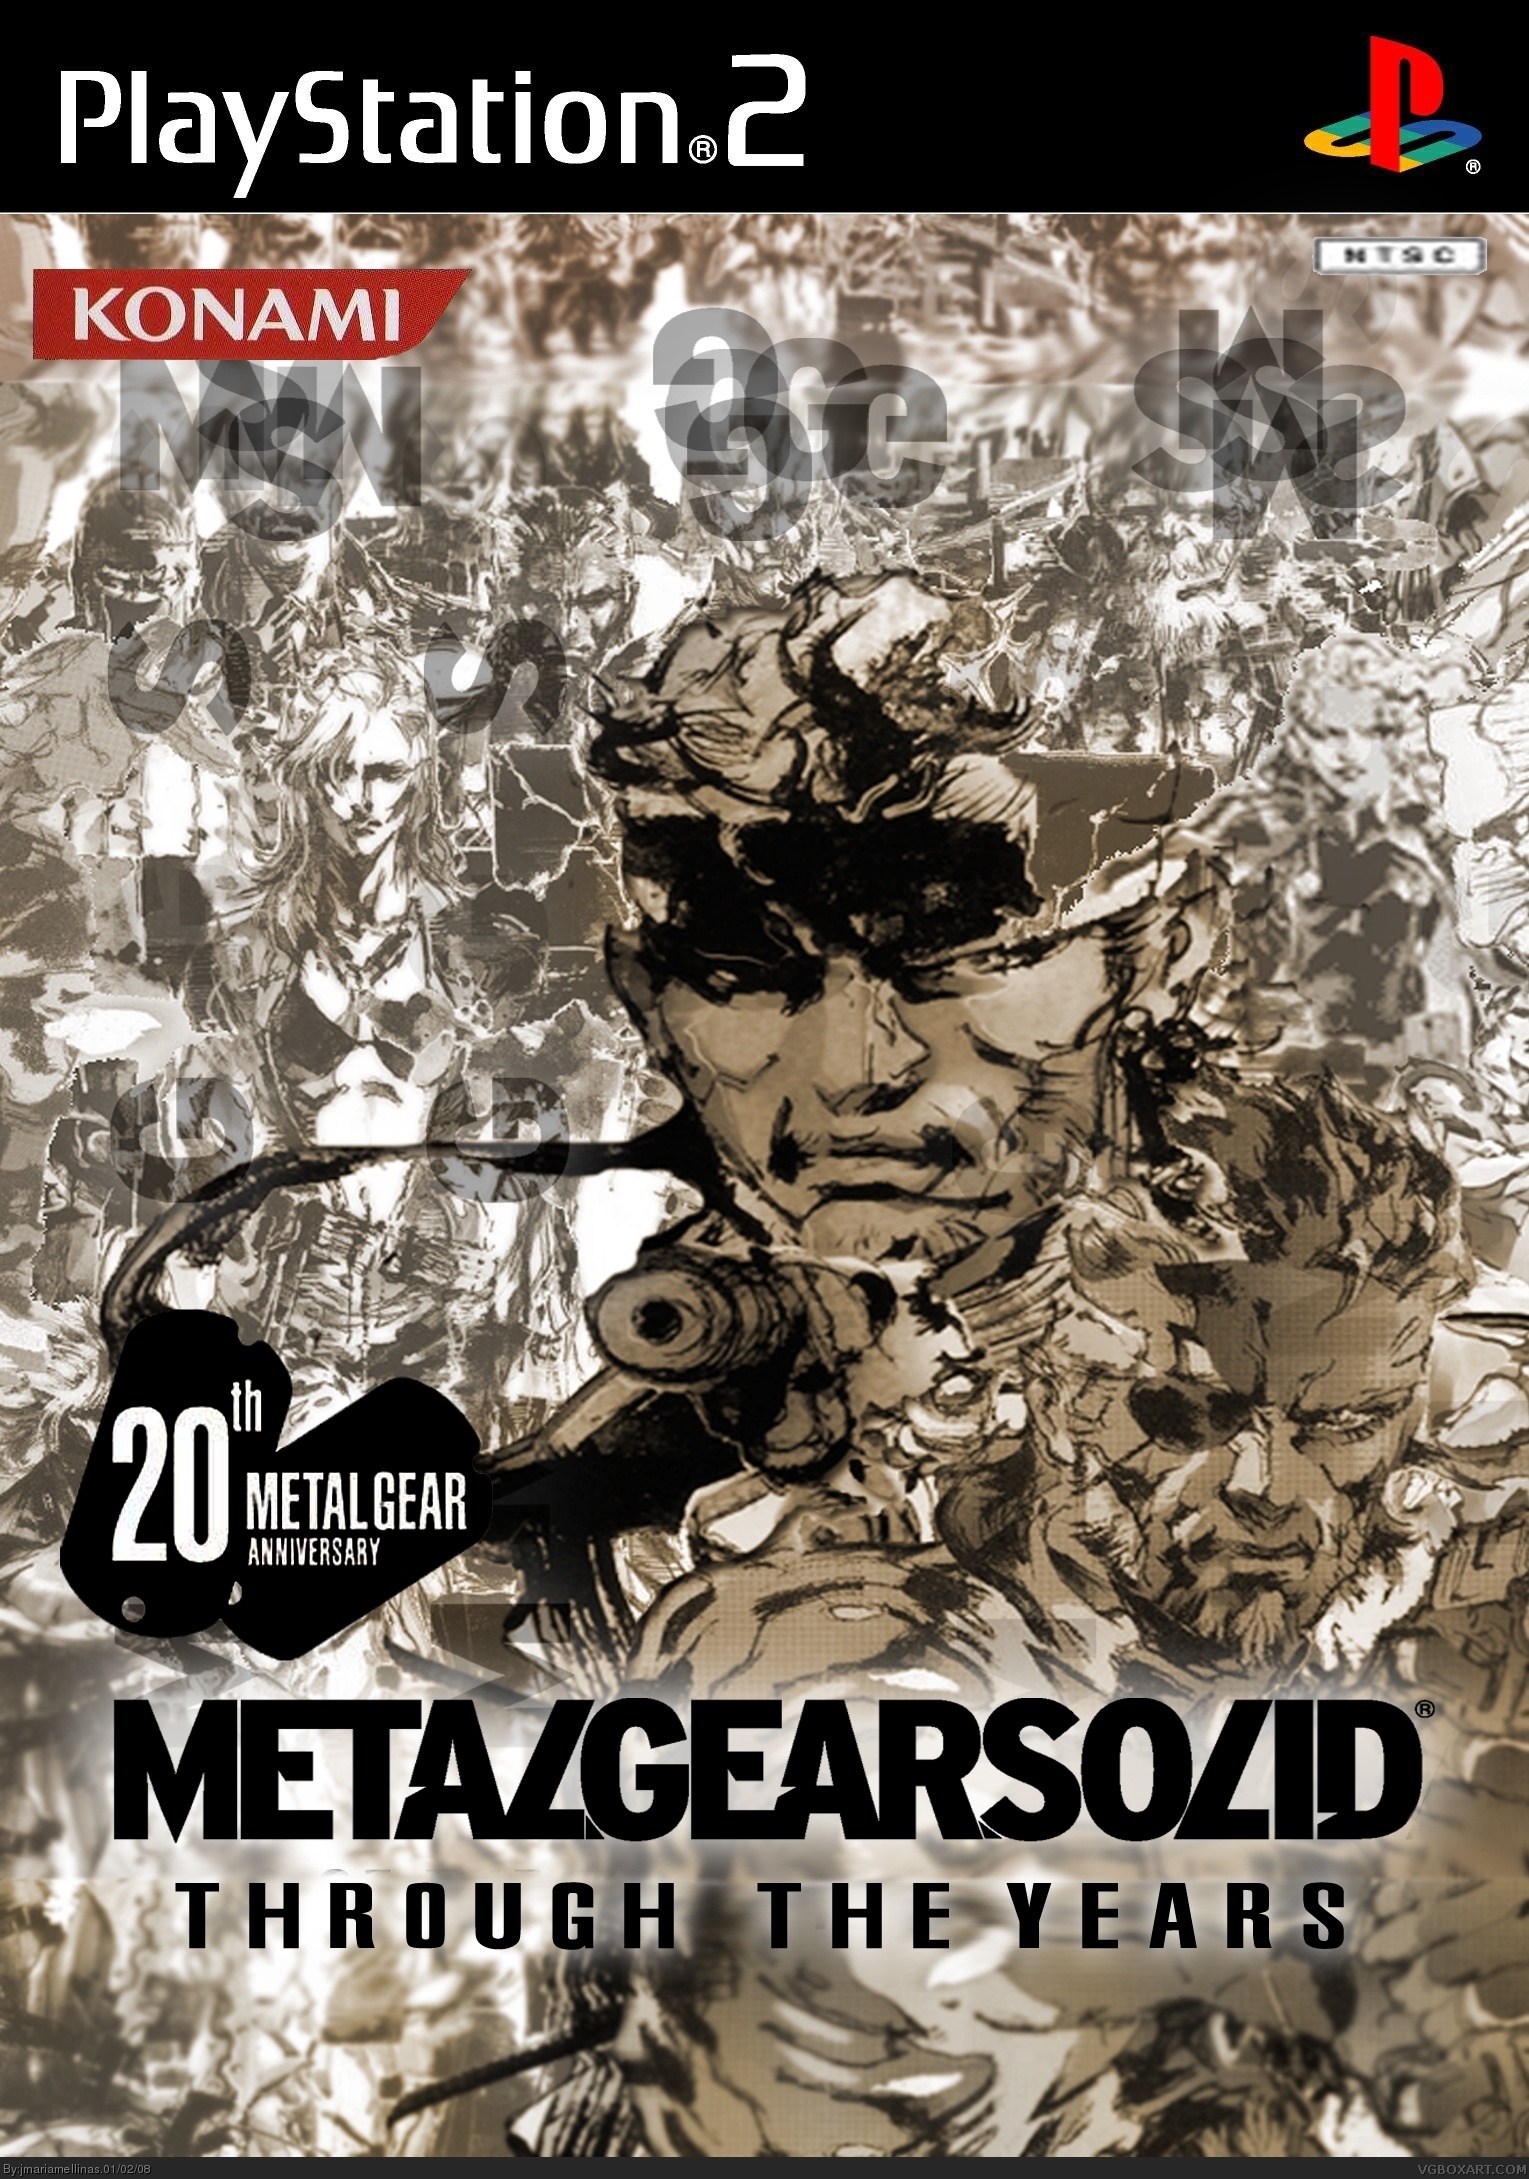 Metal Gear Solid: Through the Years box cover